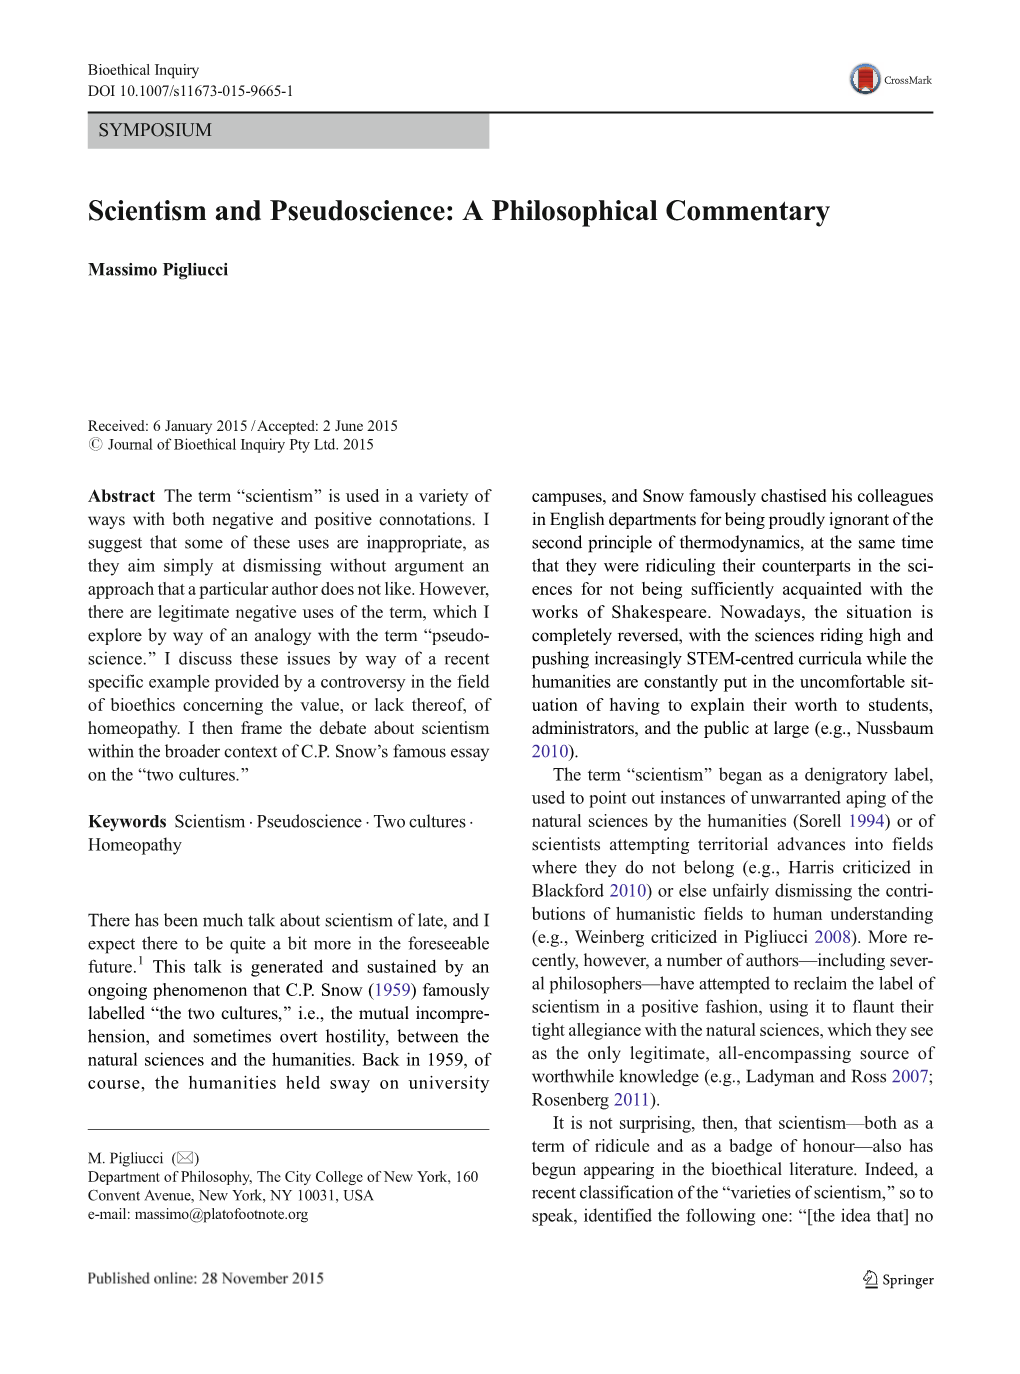 Scientism and Pseudoscience: a Philosophical Commentary